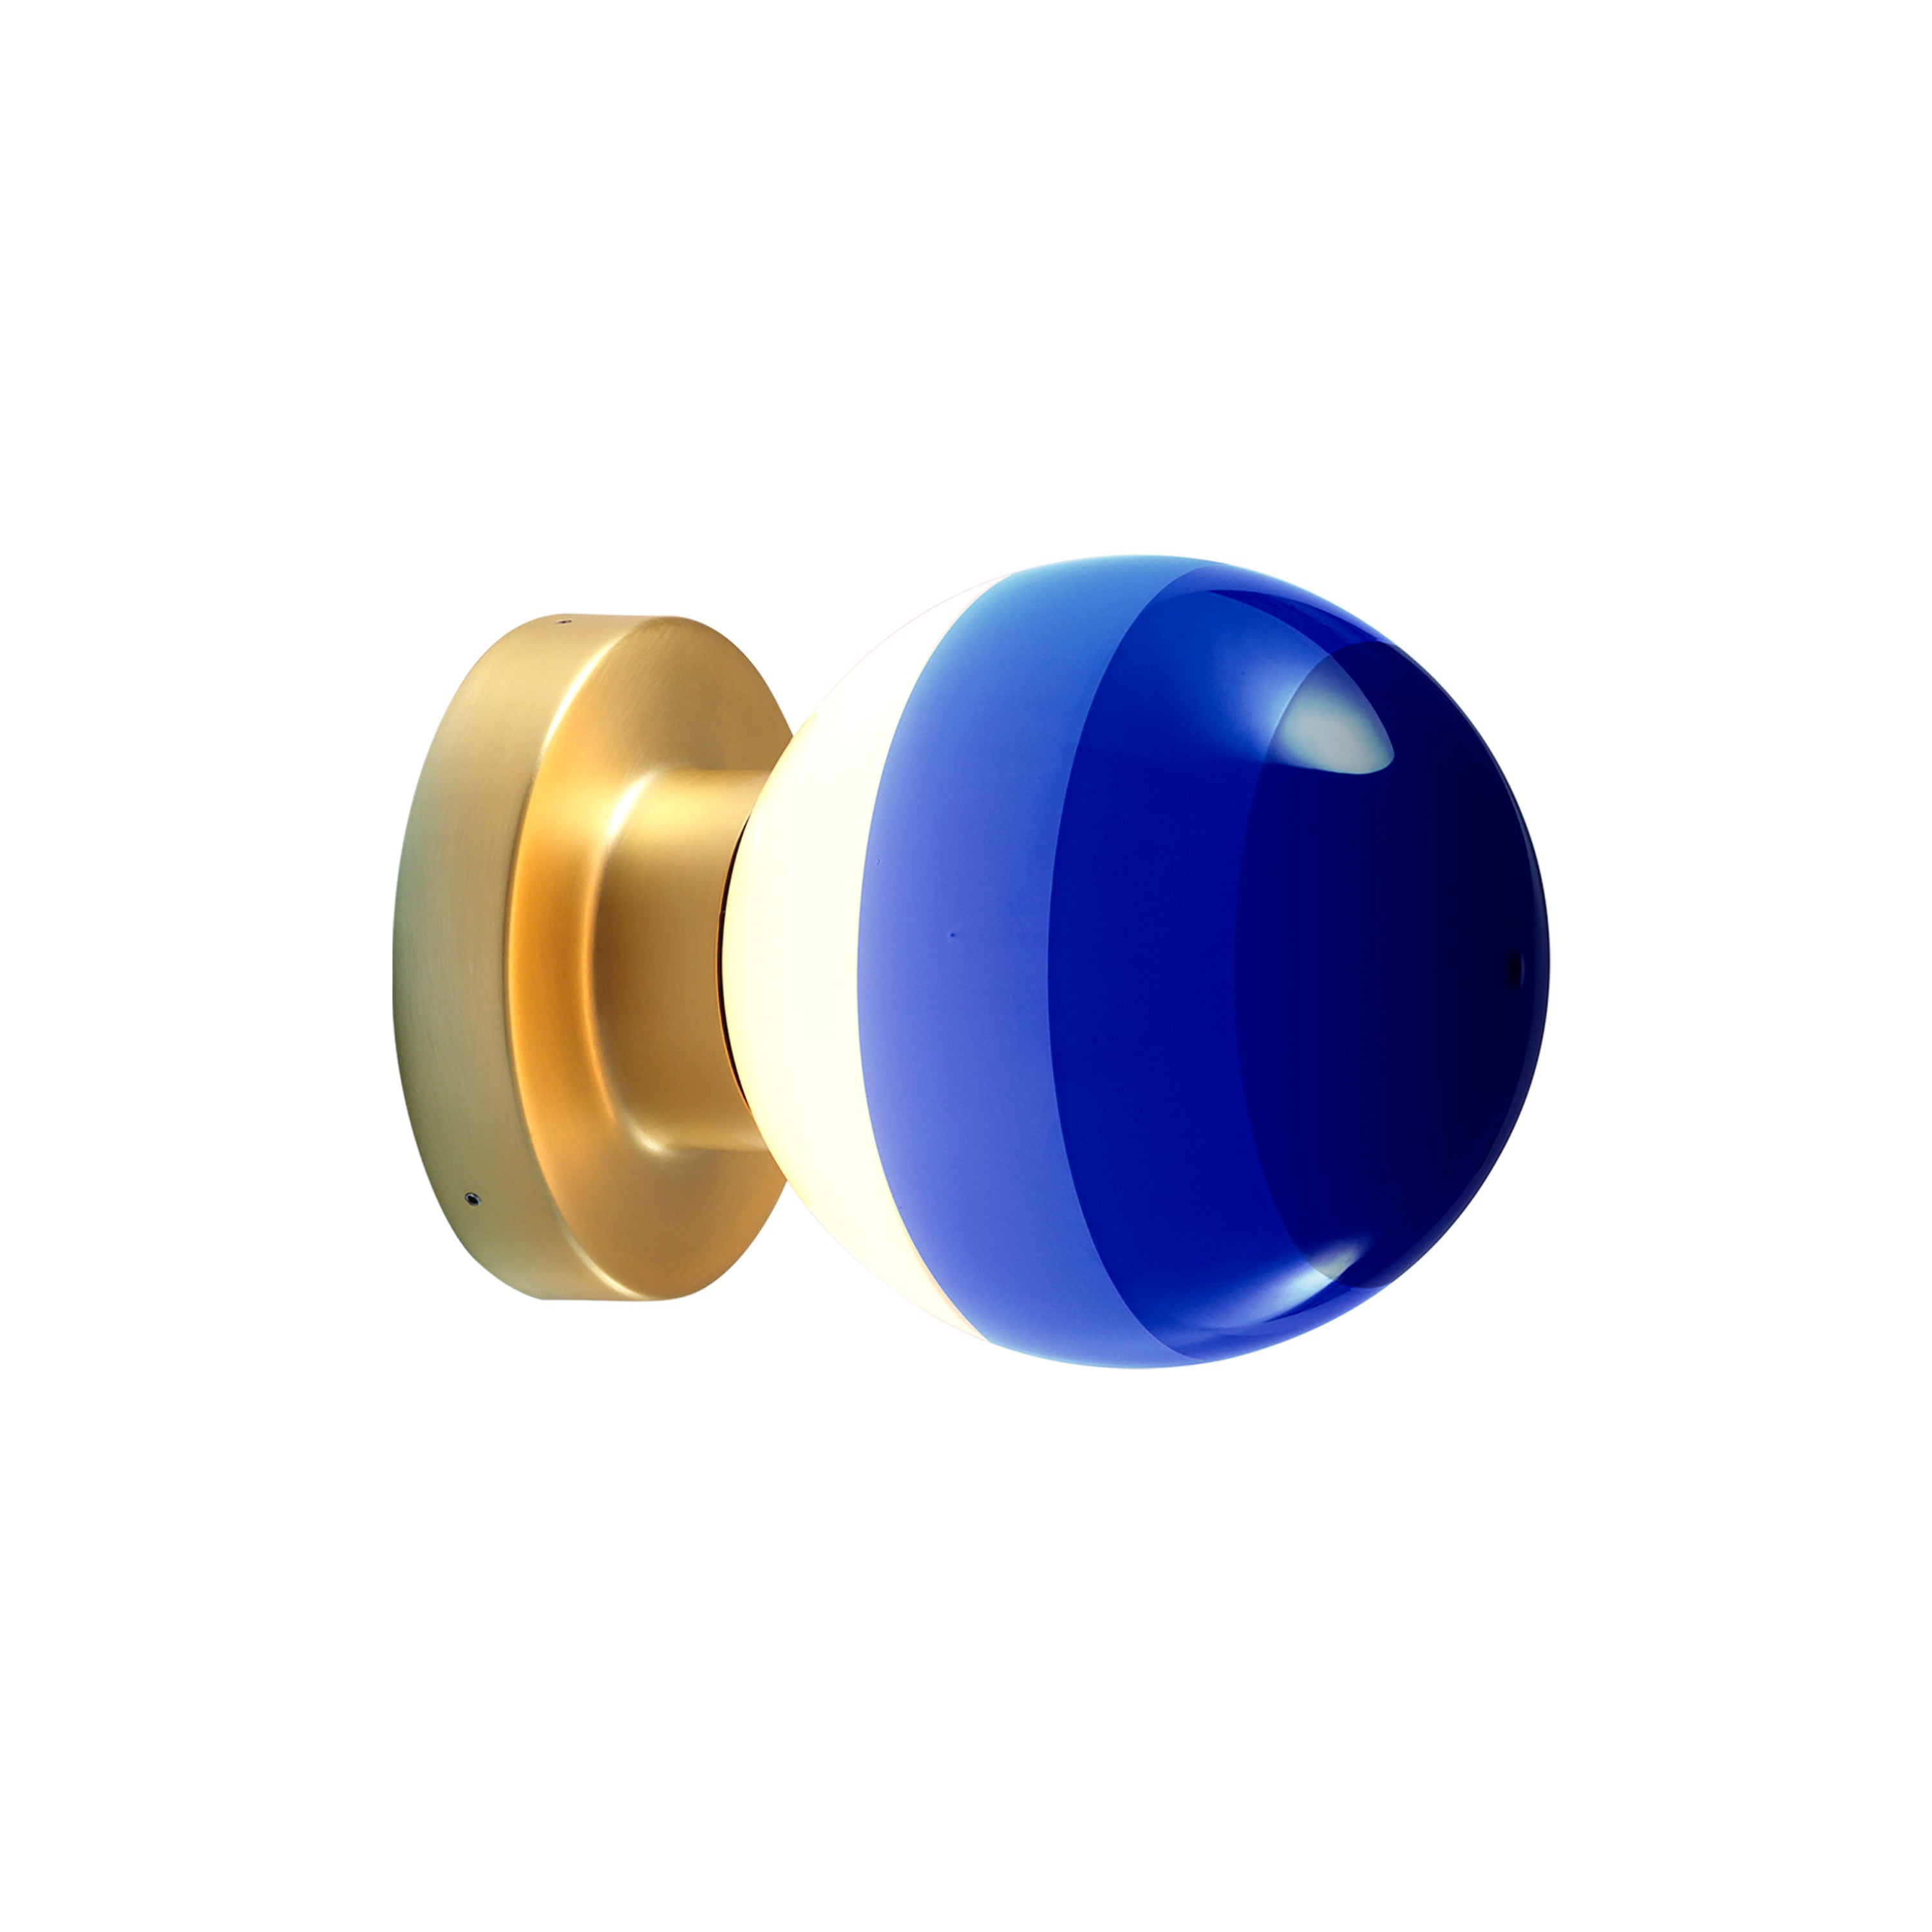 Dipping Wall Light: A2-13 + Brushed Brass + Blue